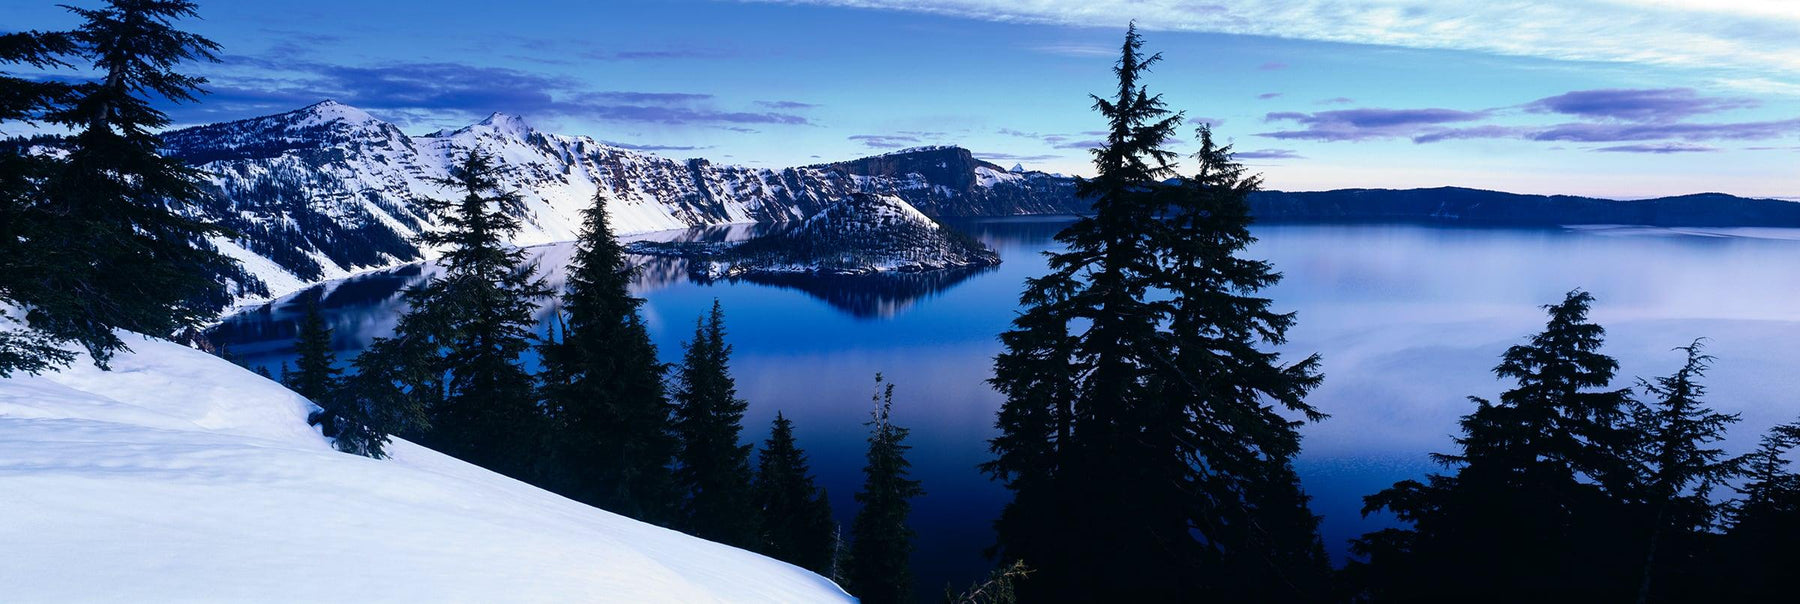 View of Crater Lake Oregon looking over pine tree silhouettes from the snow covered mountainside 